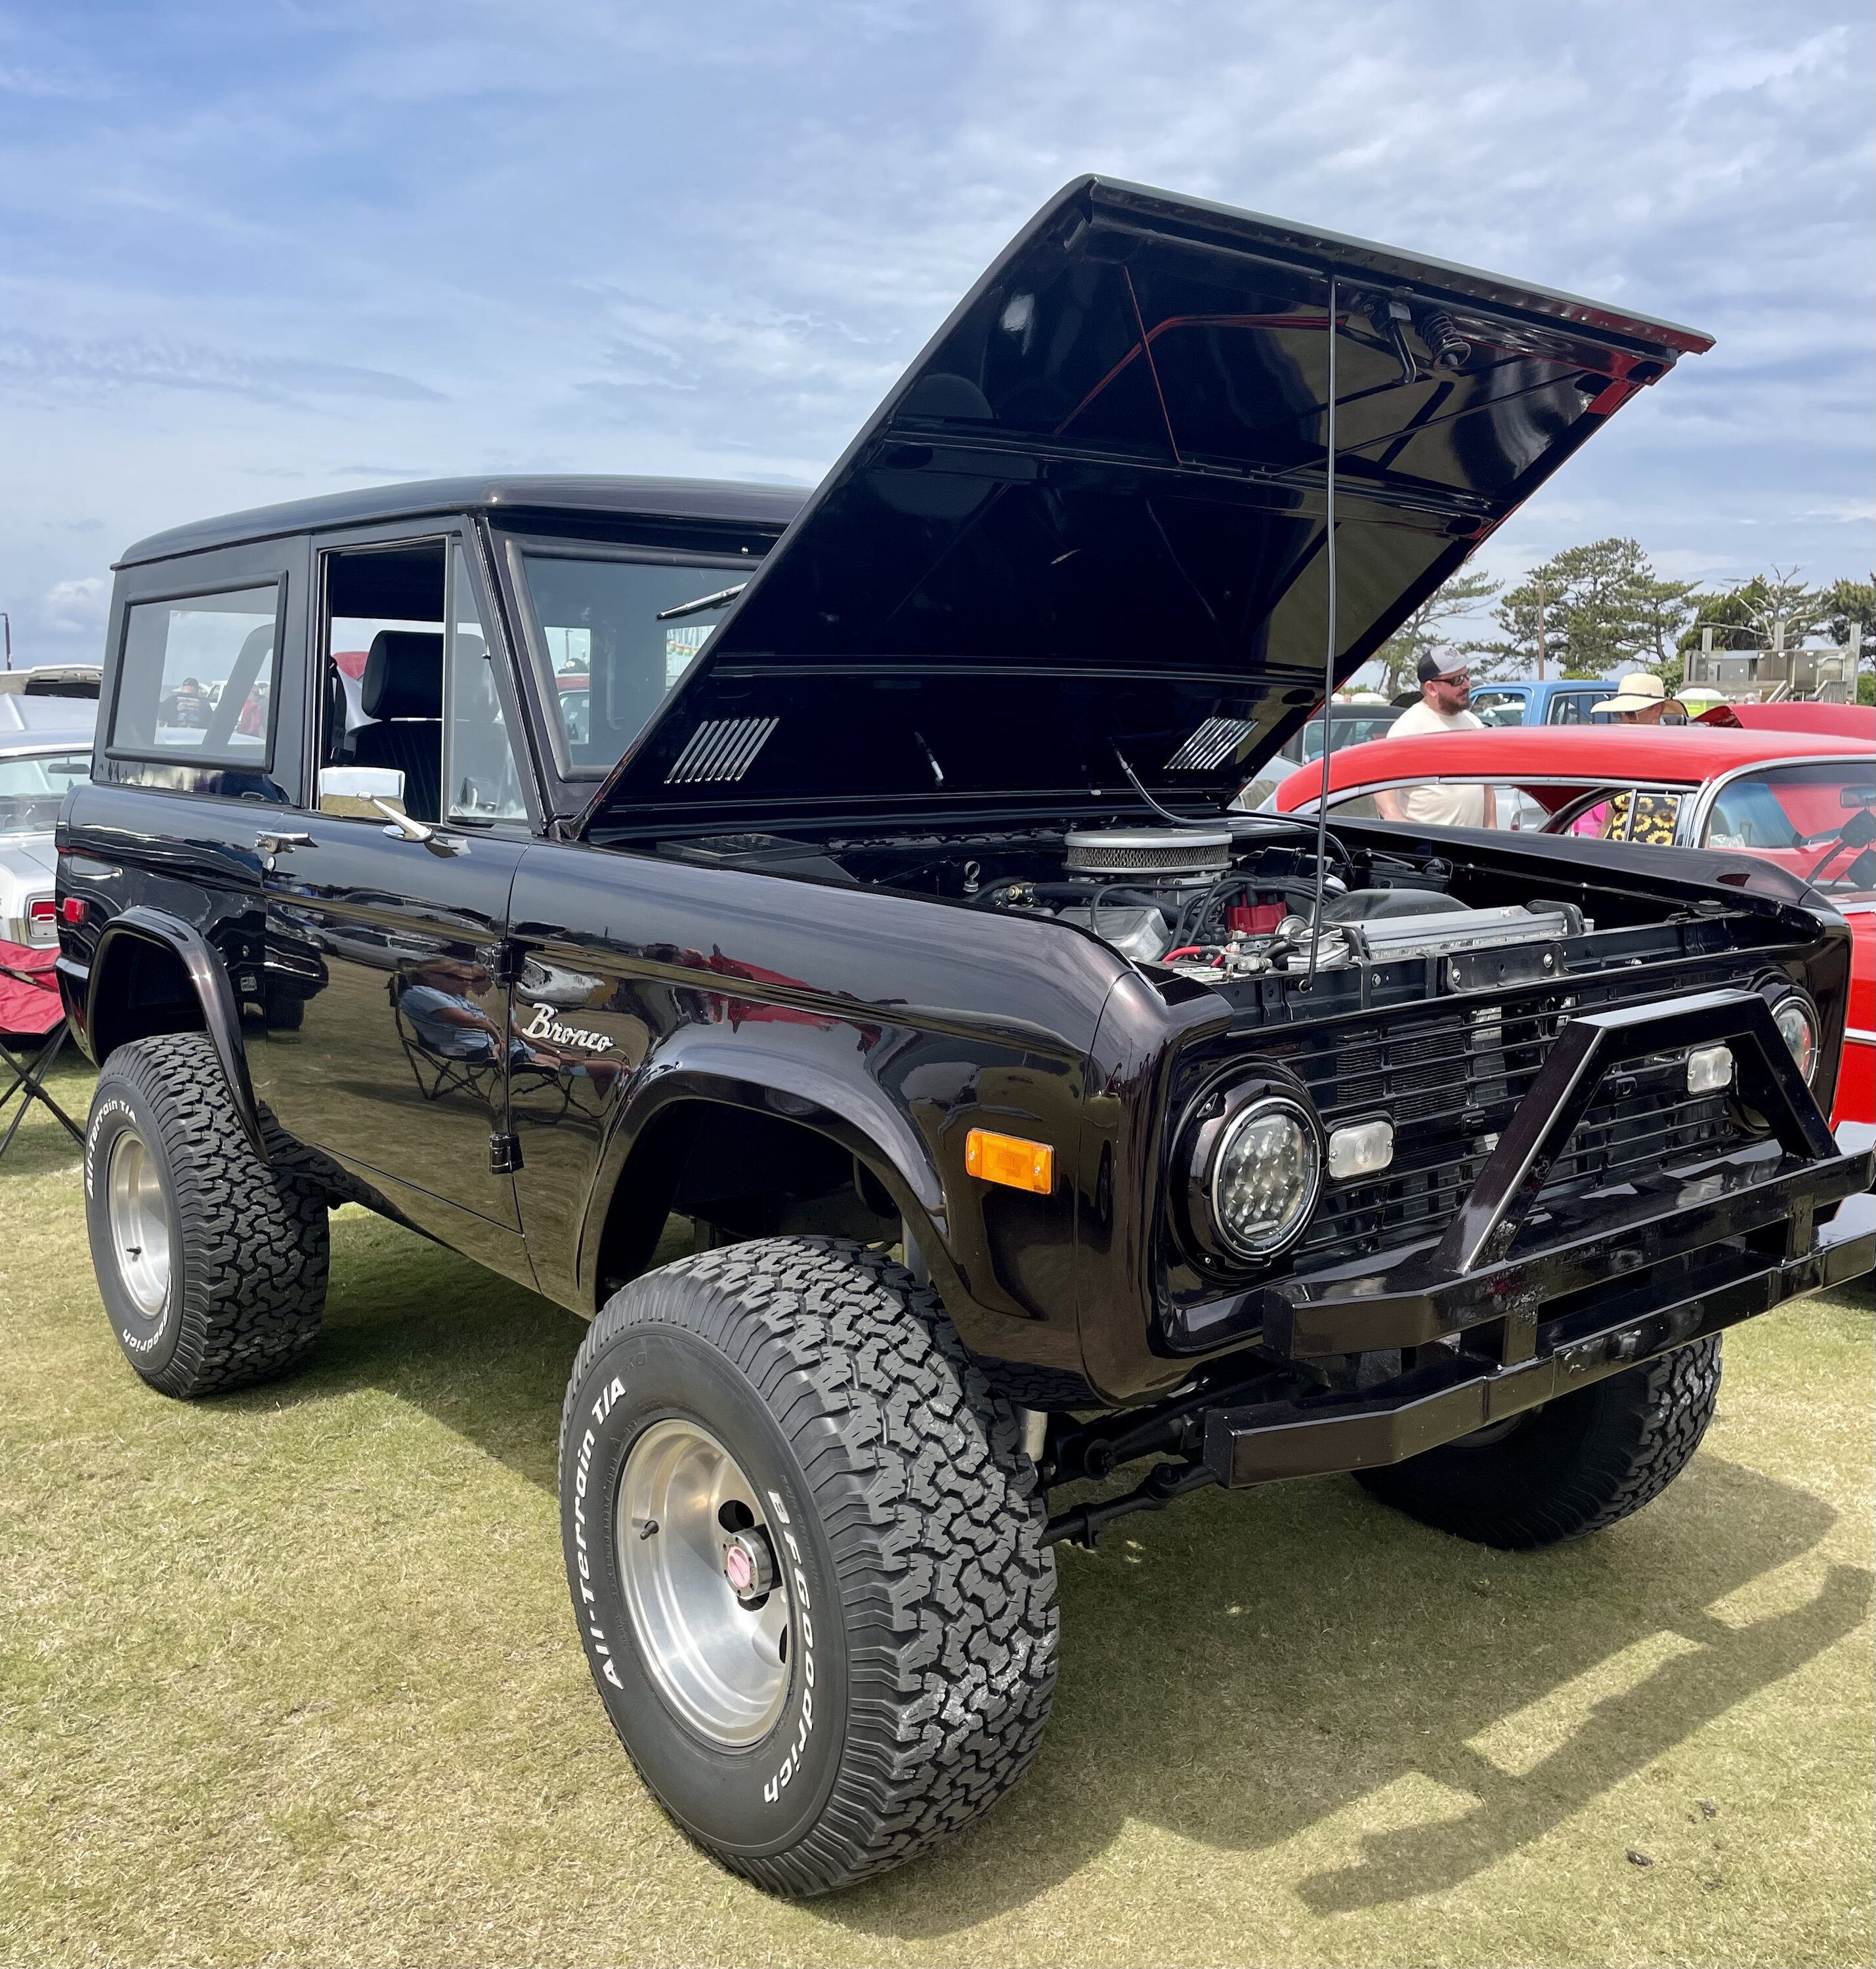 Ford Bronco Classic Broncos at the OBX Rod and Customs show this past weekend. IMG_4384